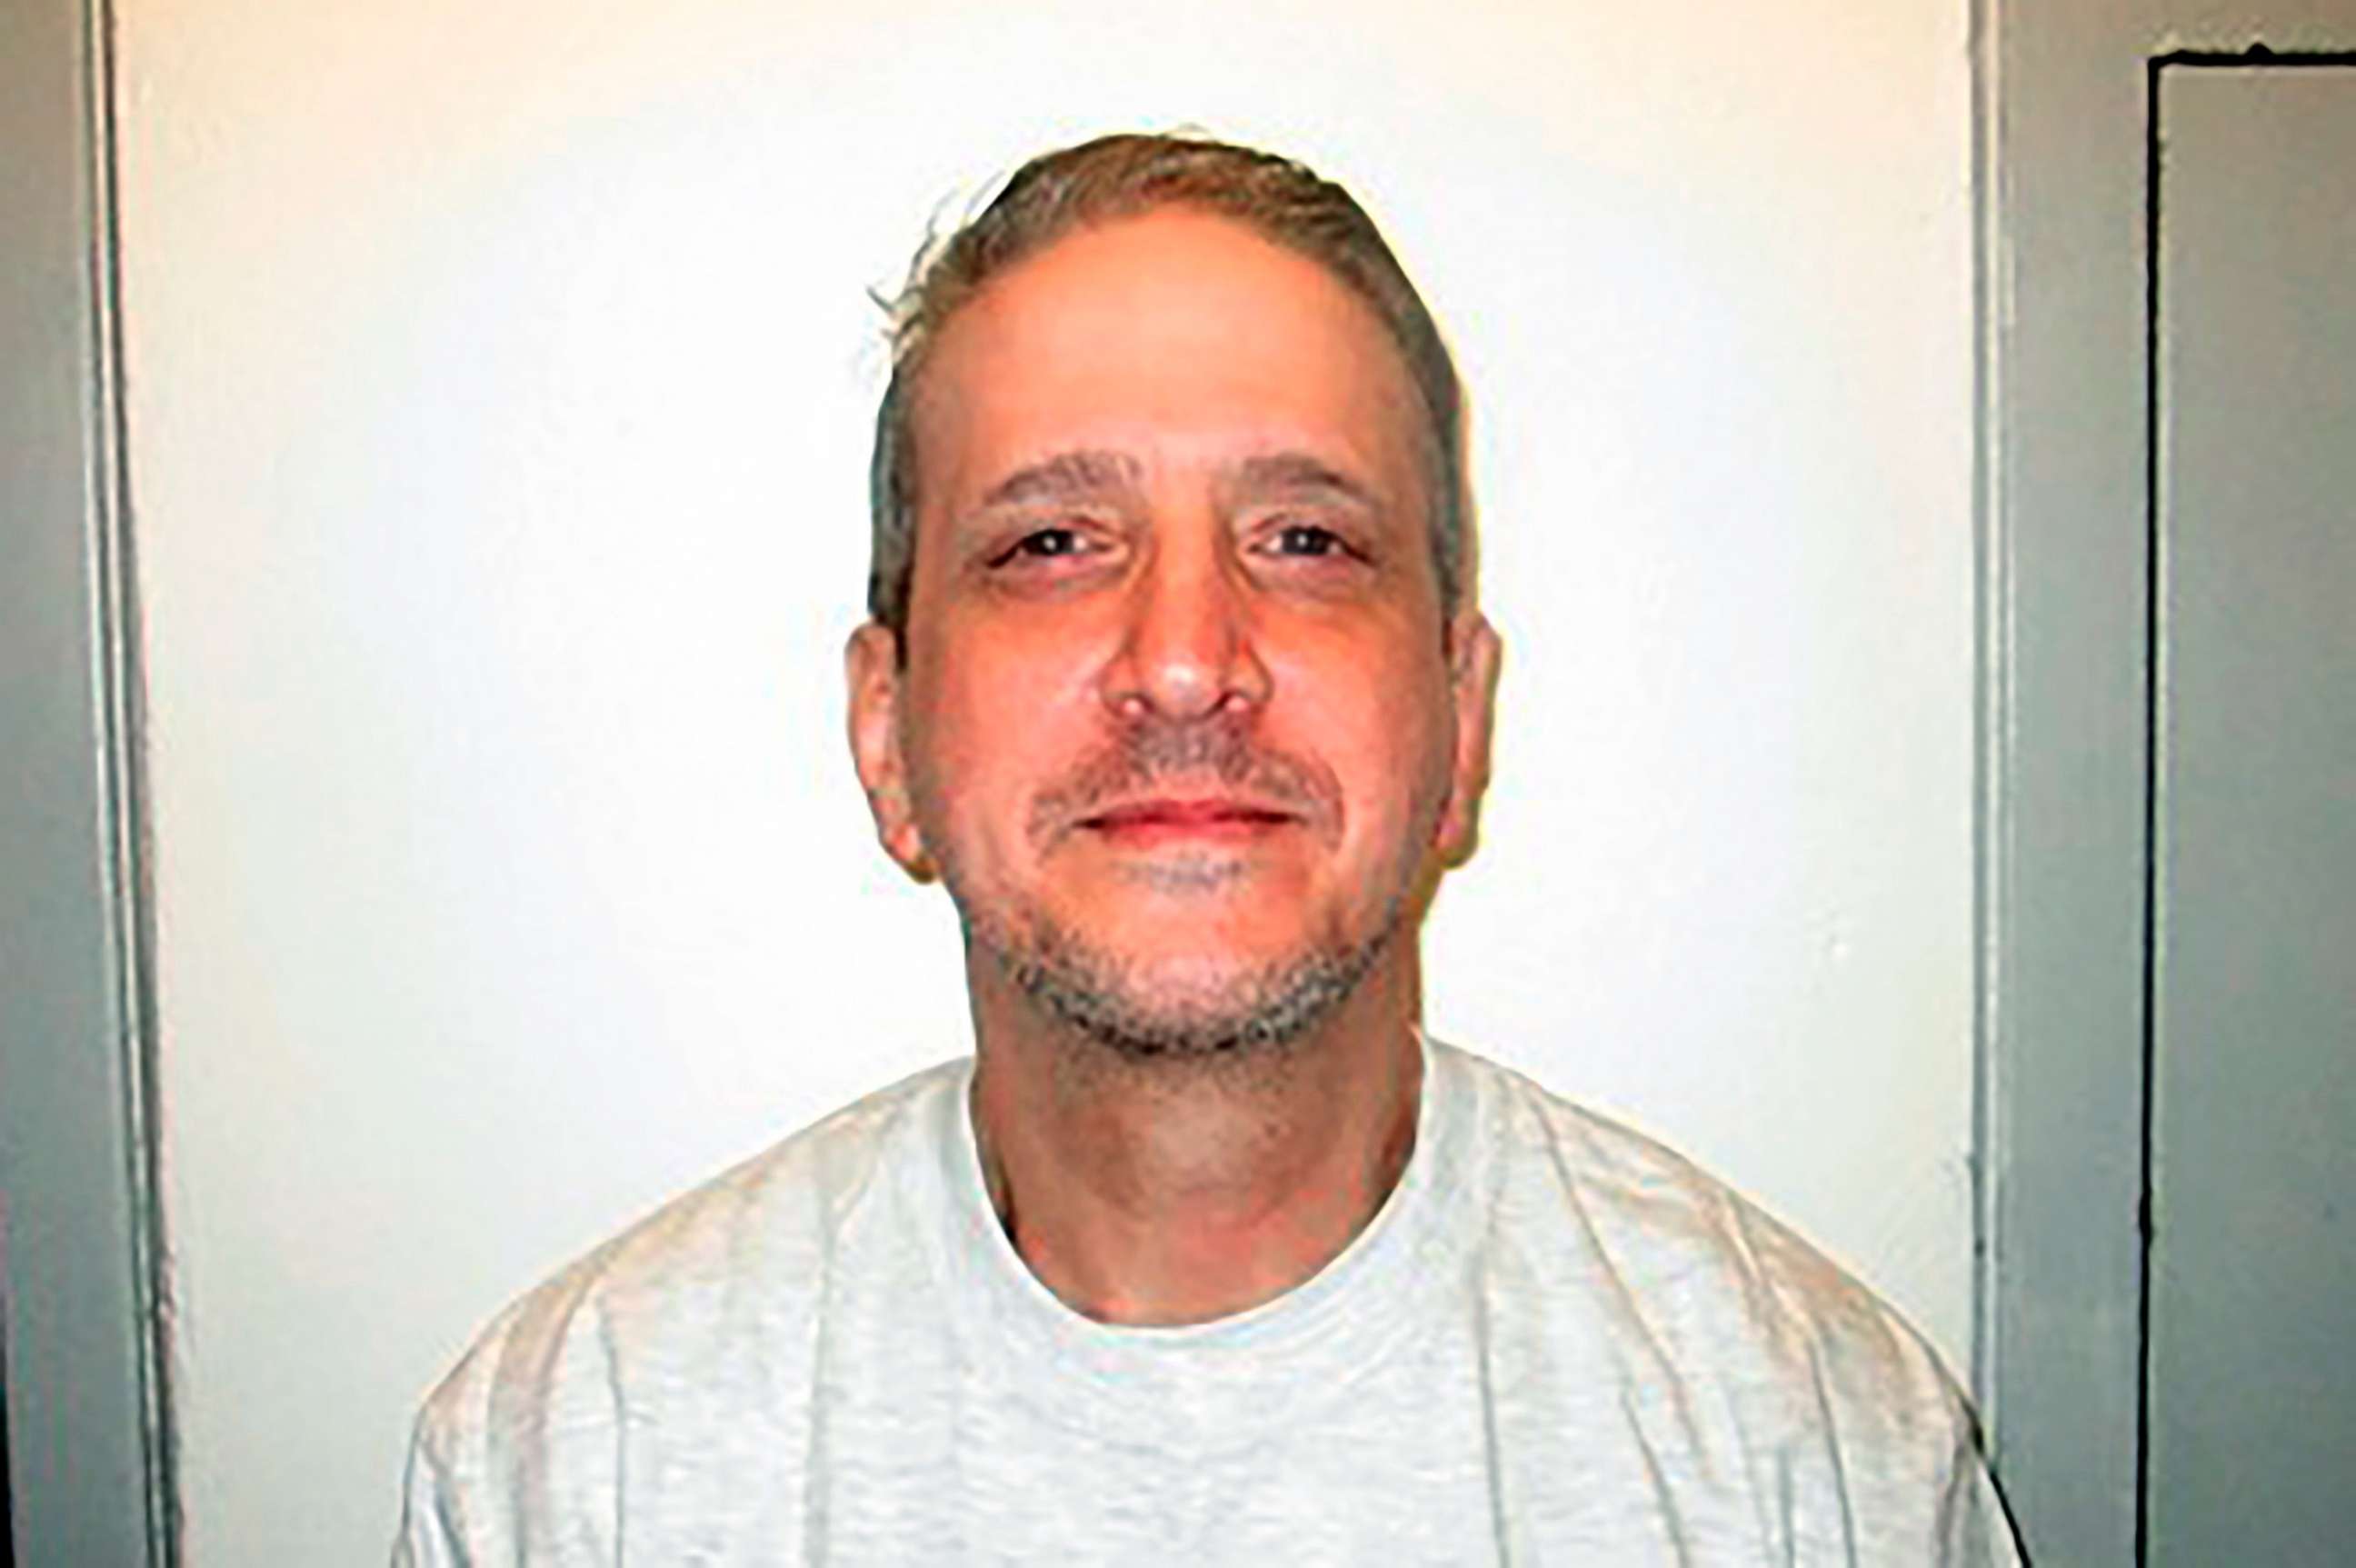 PHOTO: This photo provided by the Oklahoma Department of Corrections shows death row inmate Richard Glossip on Feb. 19, 2021.